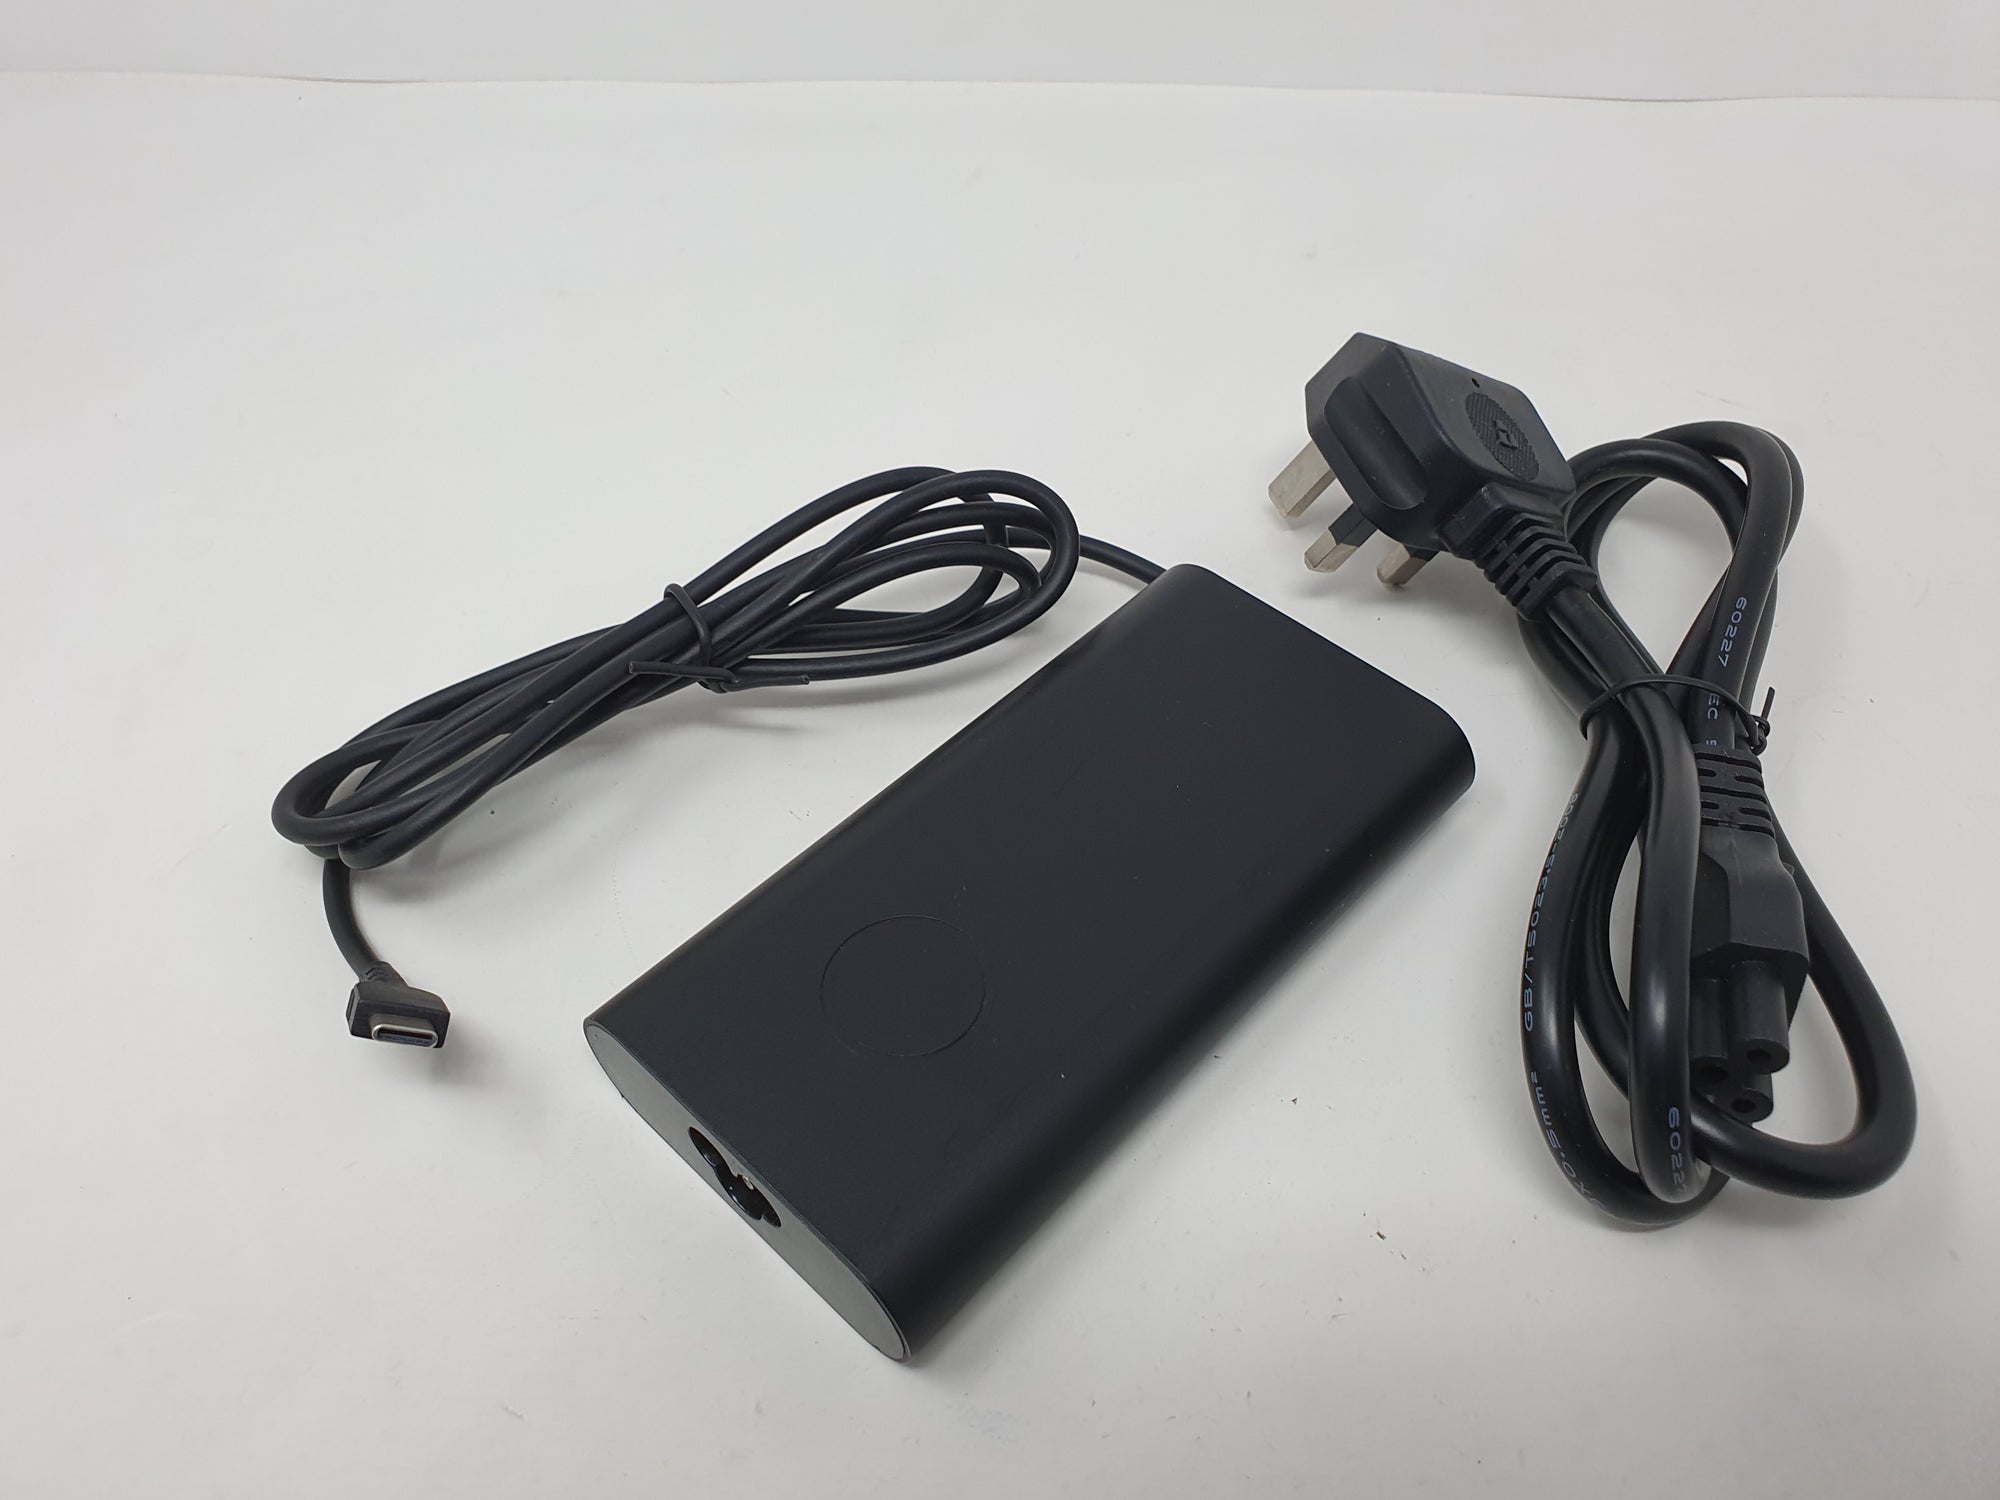 USB C Type-C Laptop Charger Power Supply Adapter for Lenovo Laptop